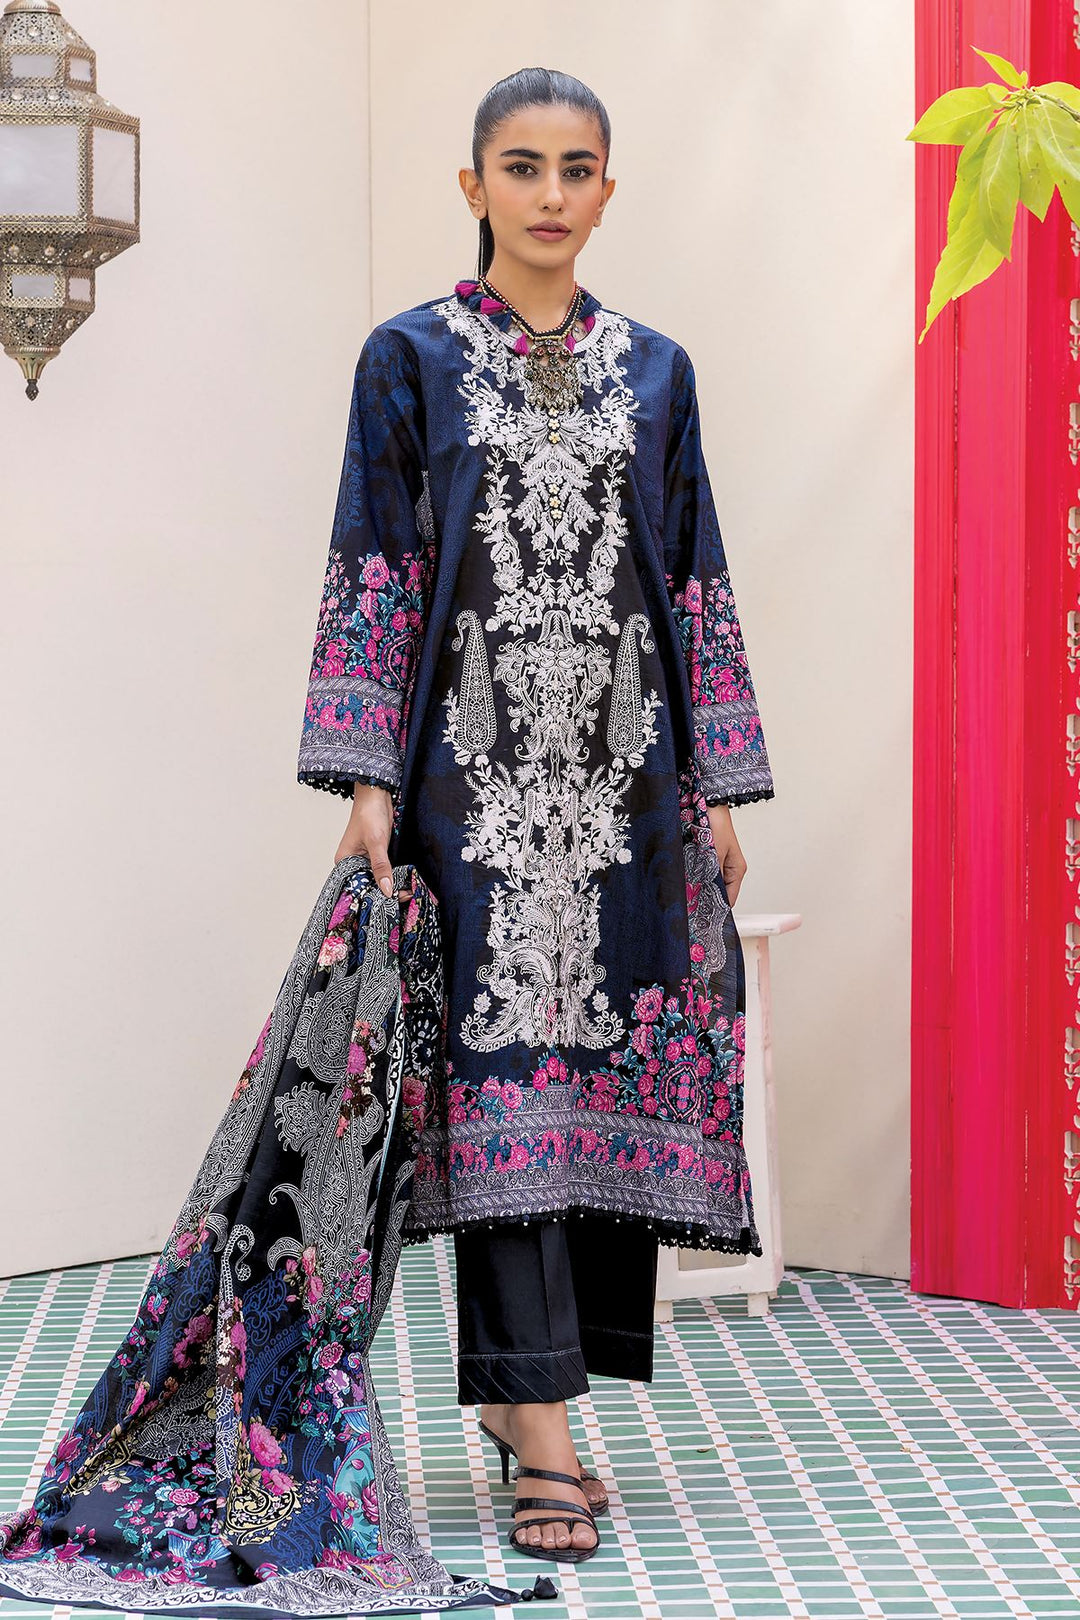 Pakistani Branded Clothes a woman in a black and blue outfit